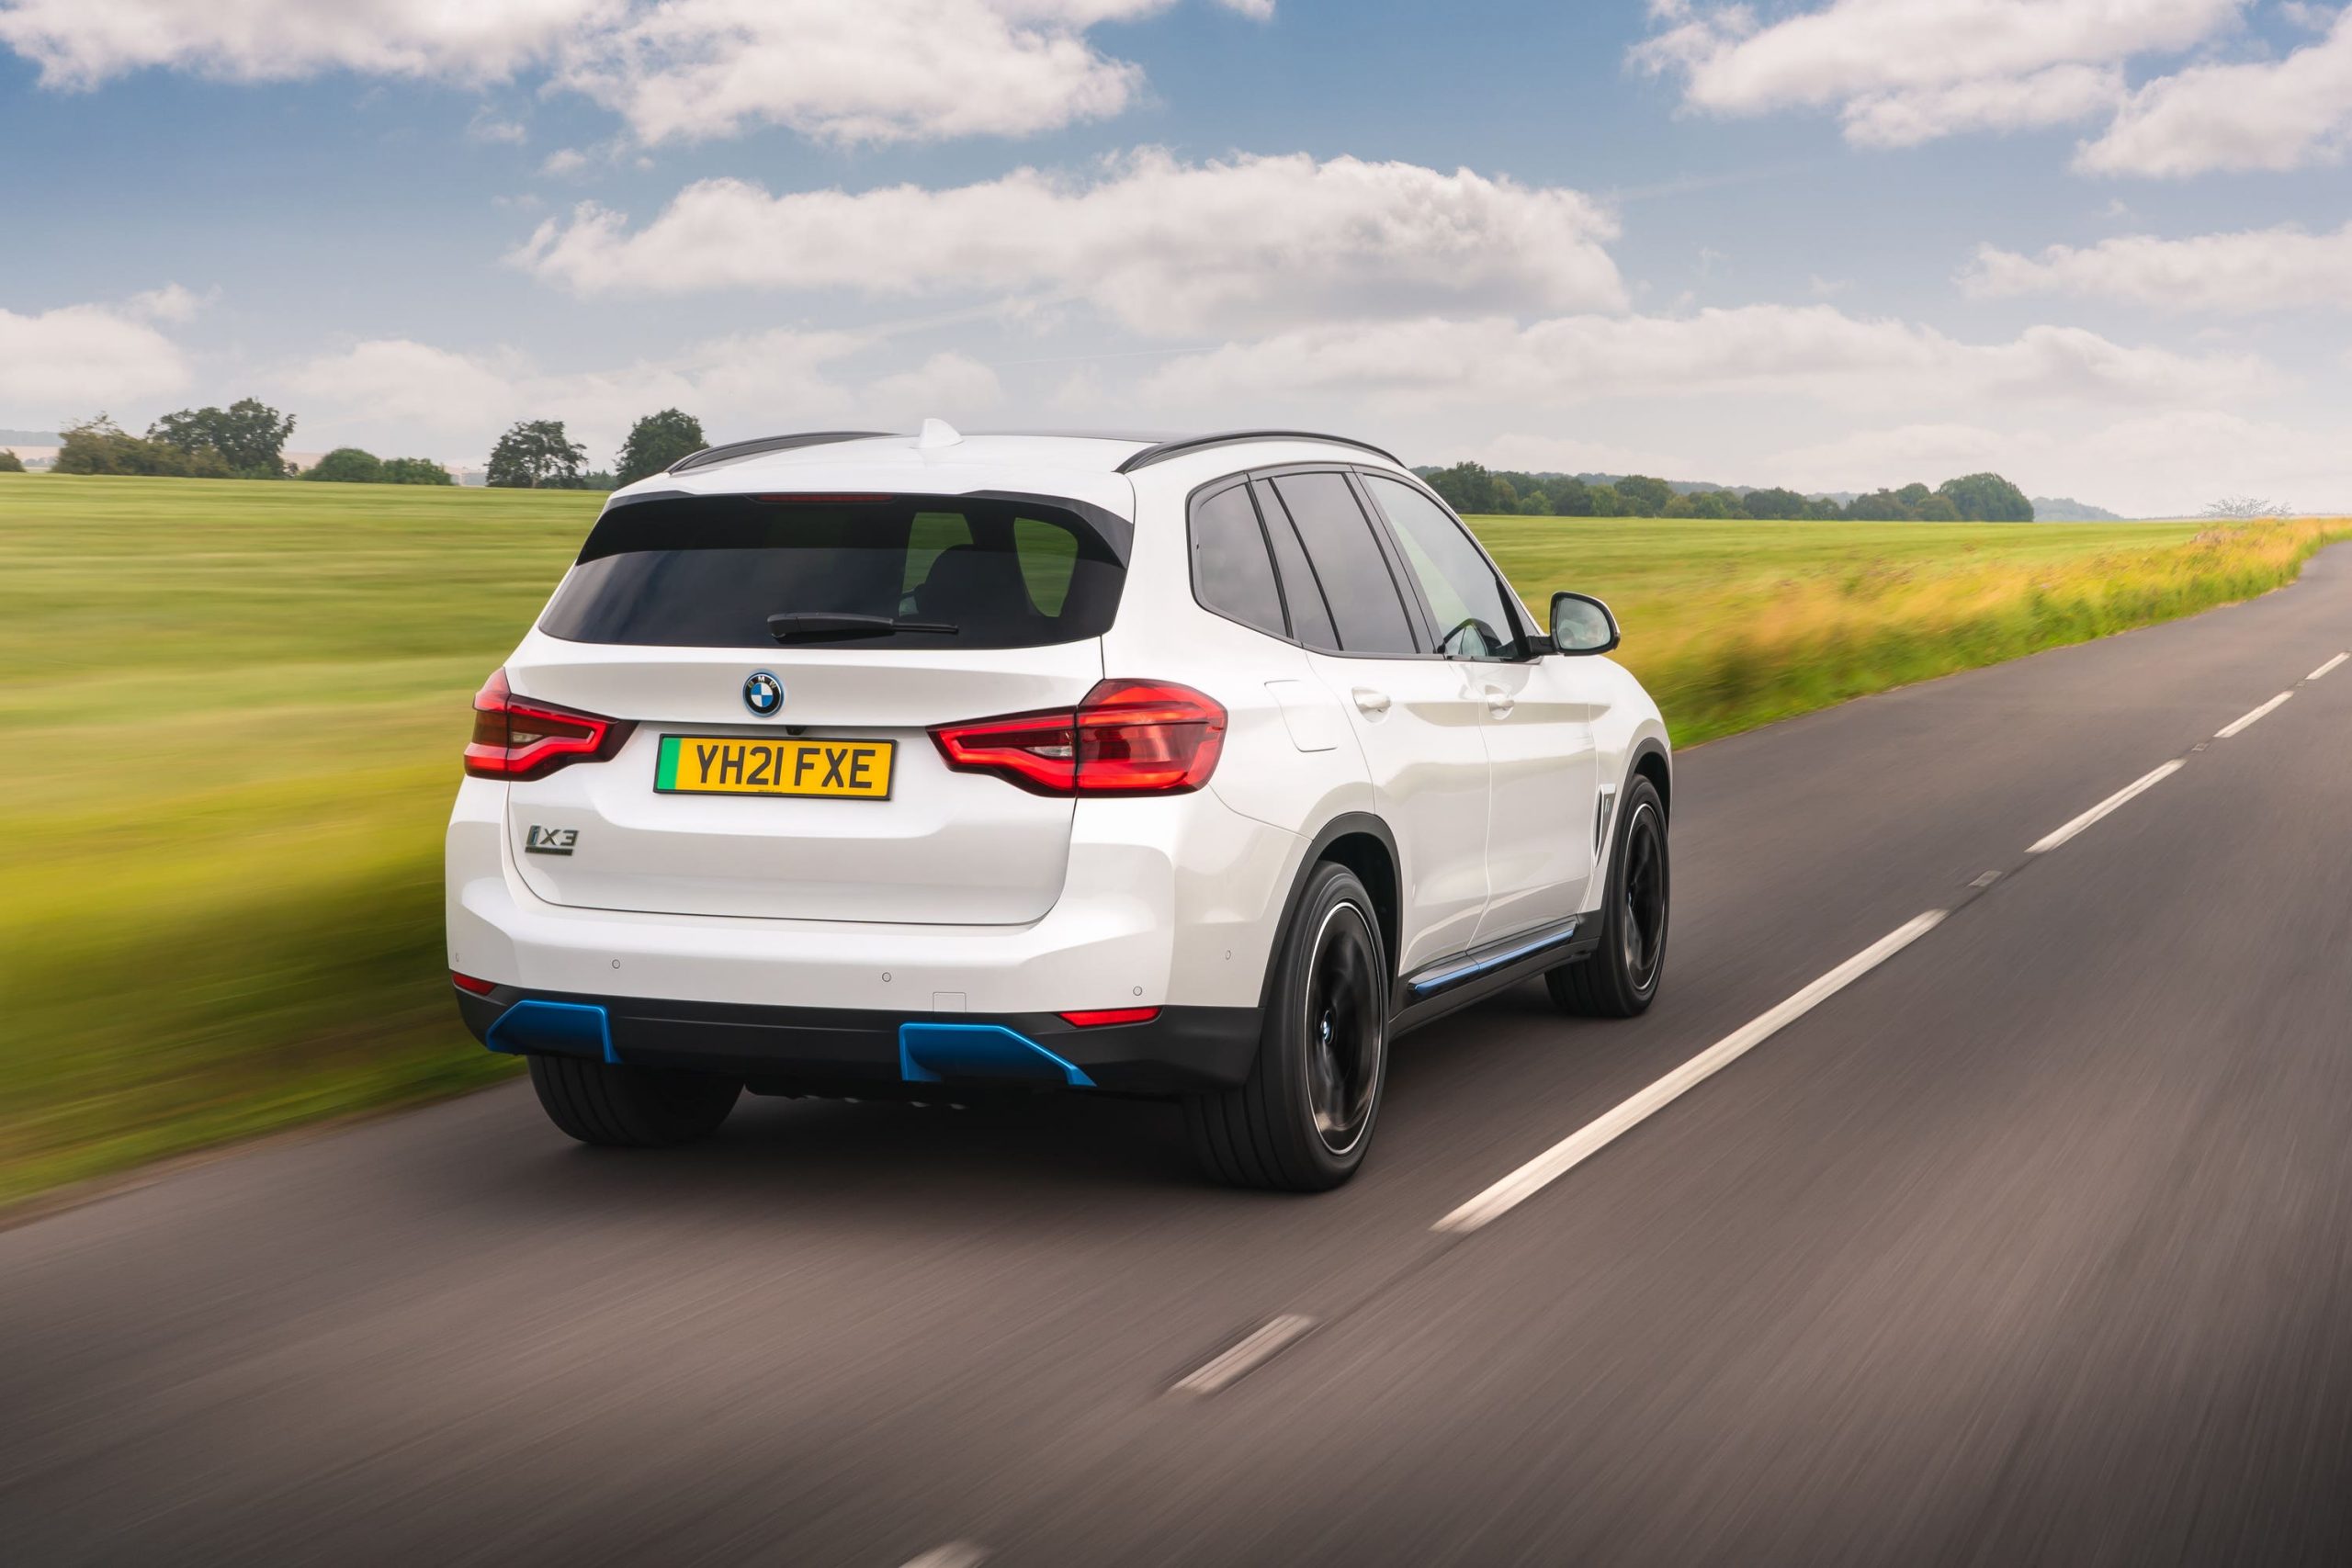 BMW iX3 from behind